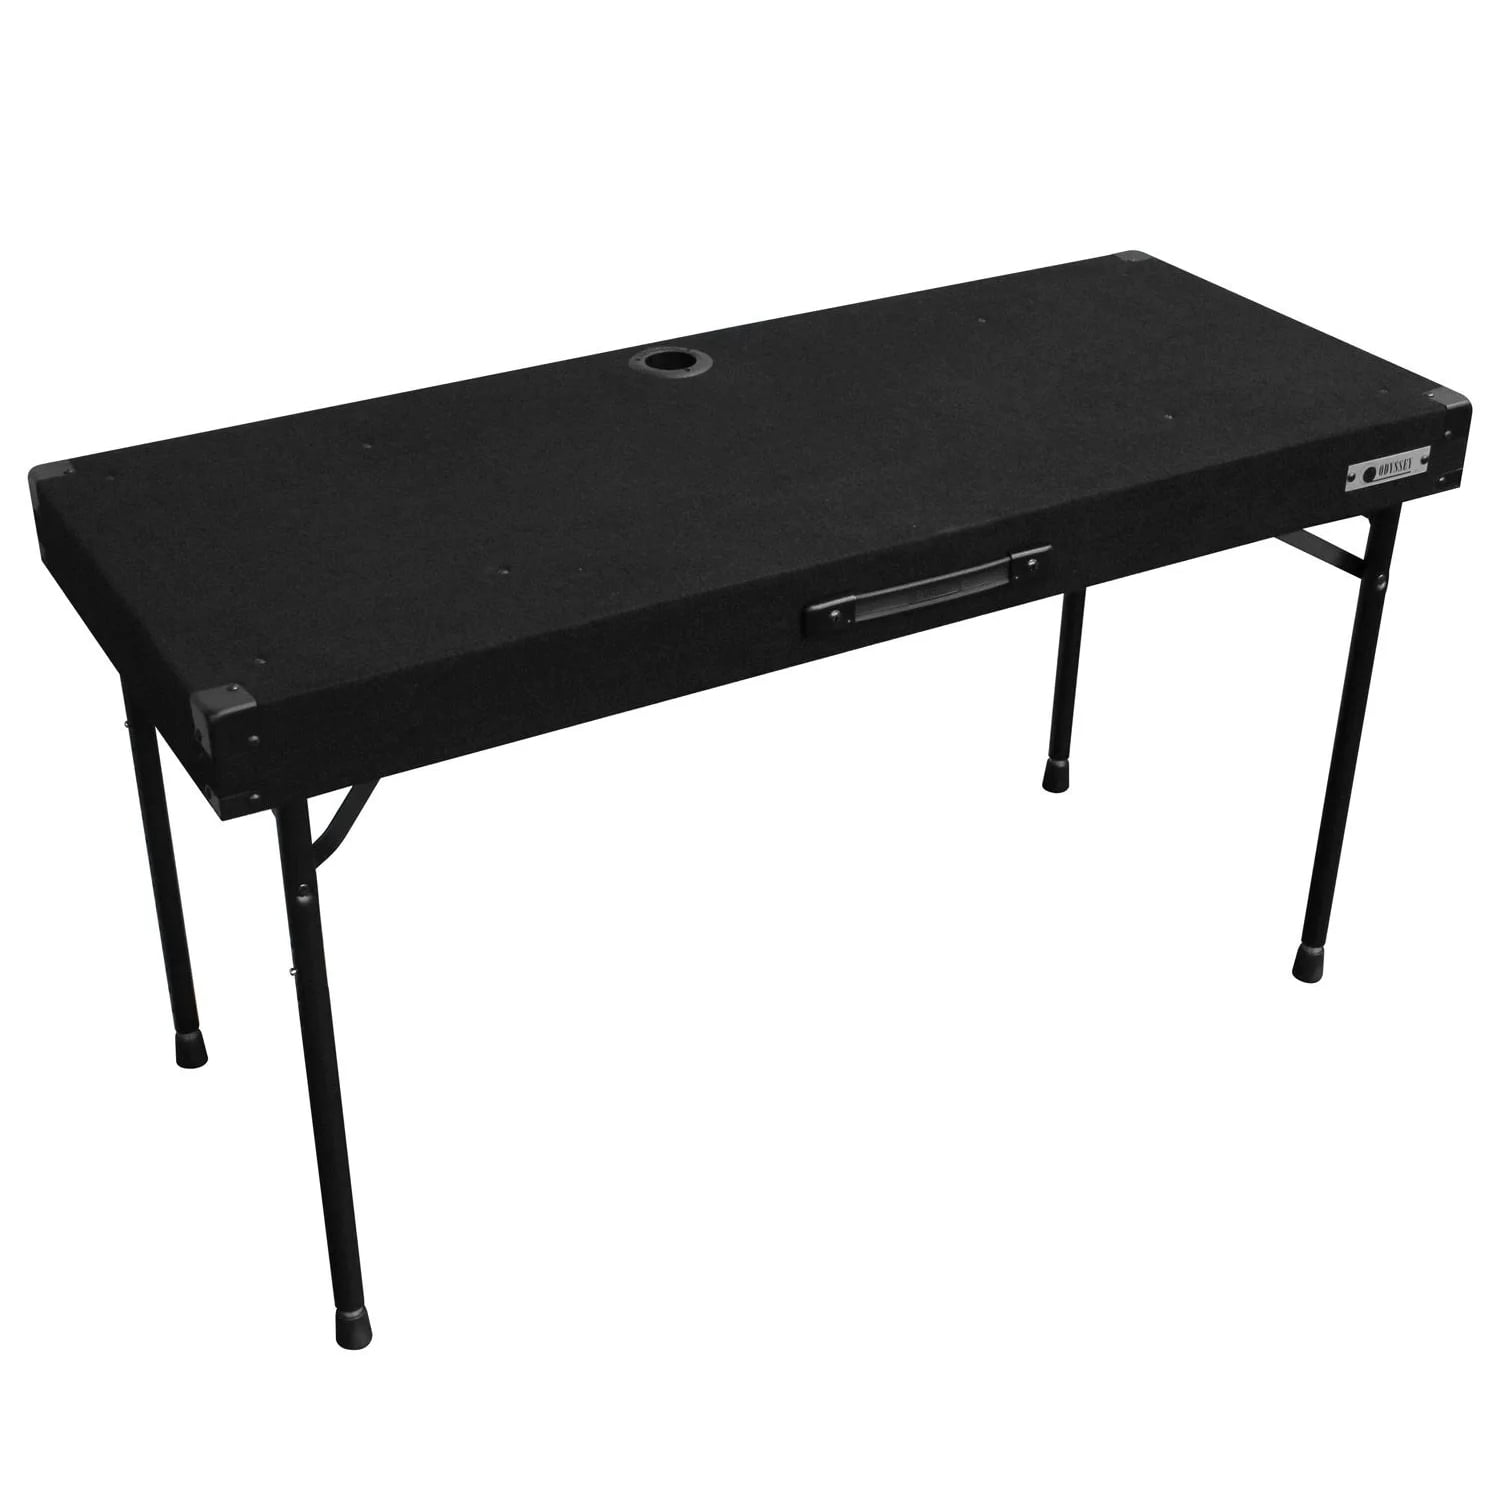 Odyssey CTBC2048 Foldable DJ Table with Adjustable Height and 